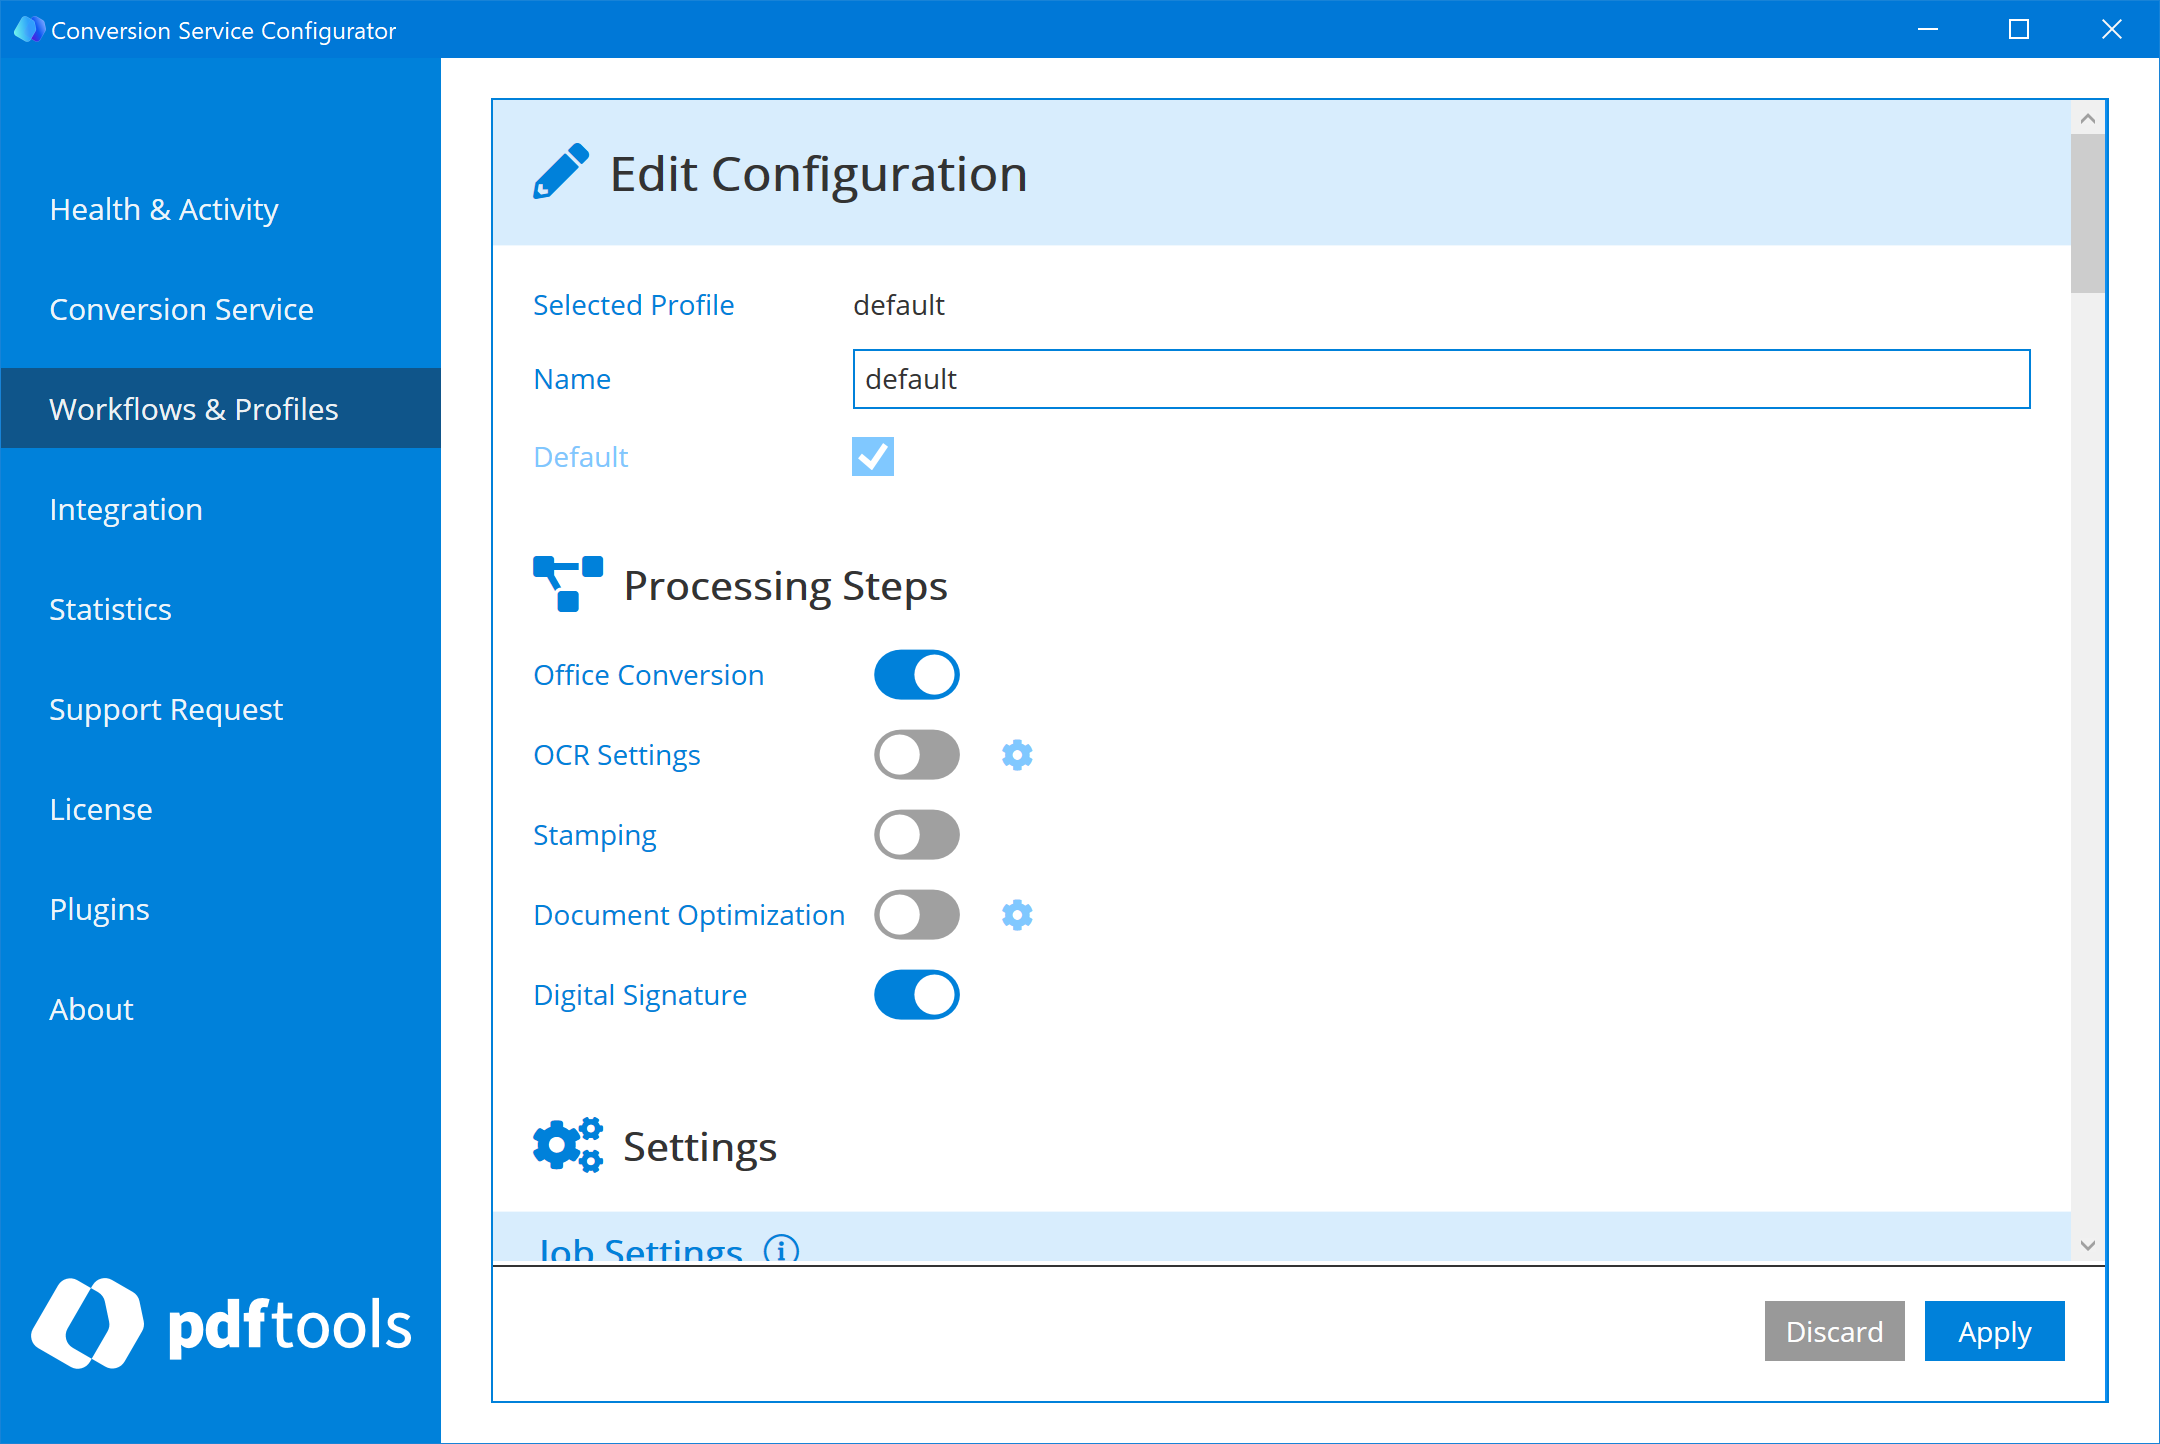 Toggle to enable digital signatures in the Conversion Service Configurator